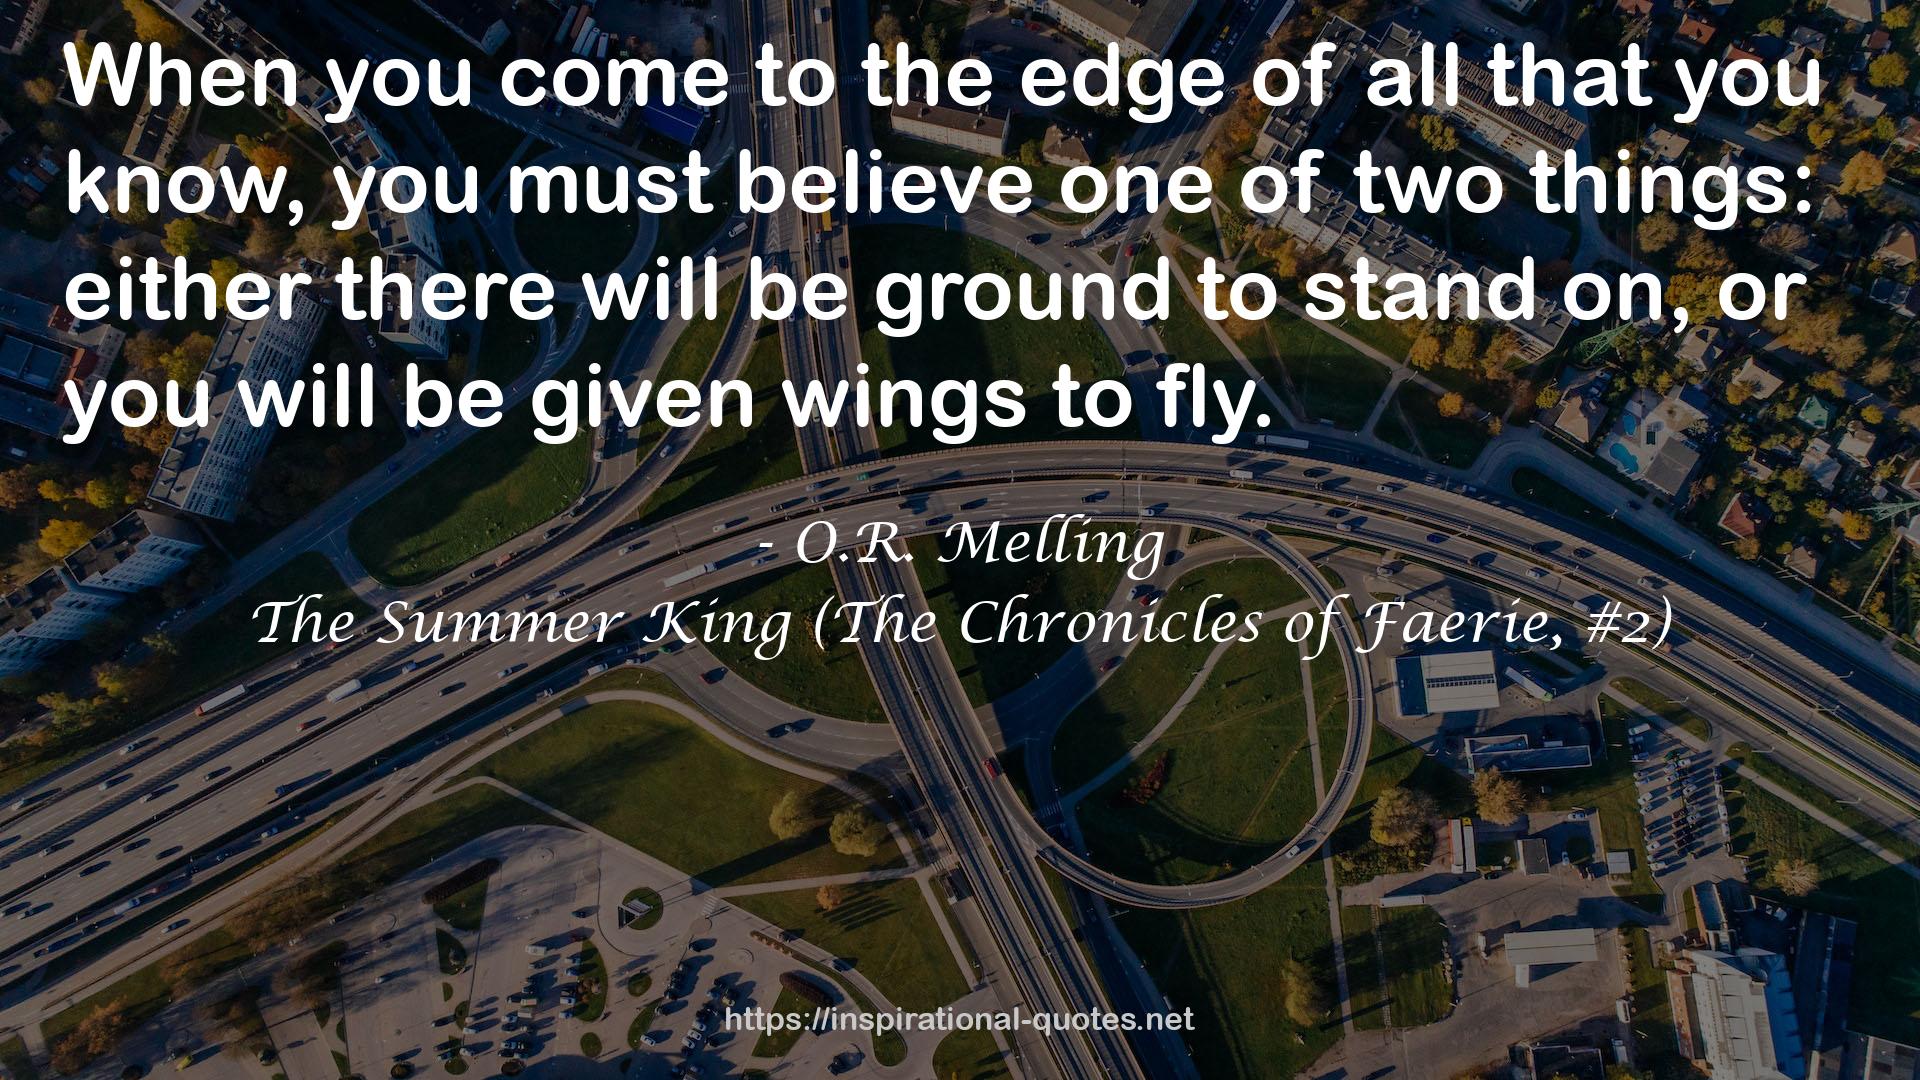 O.R. Melling QUOTES